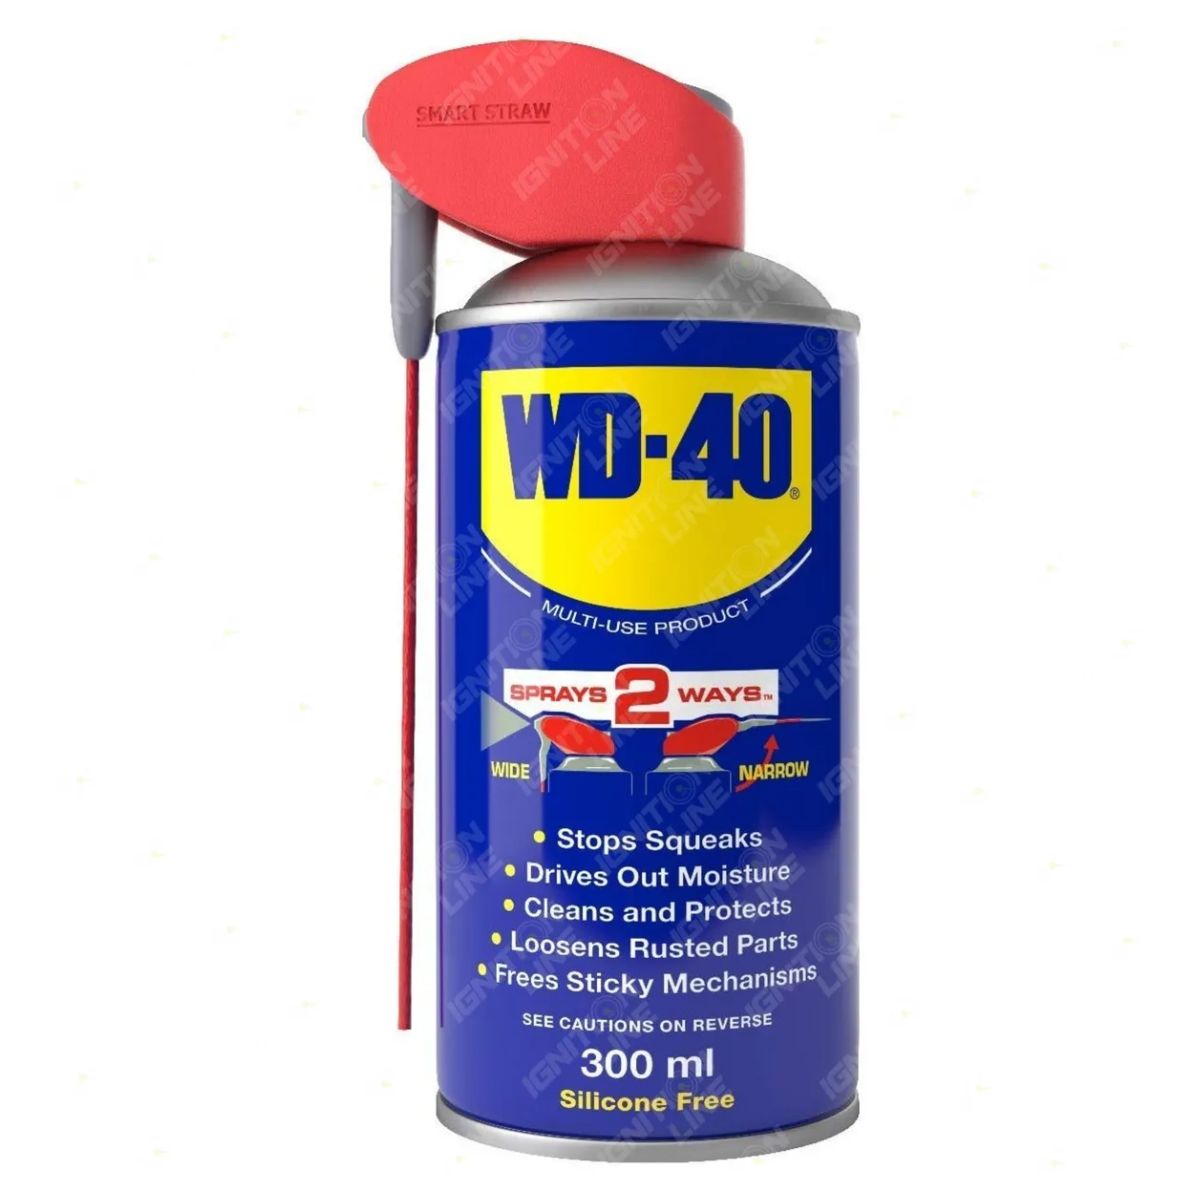 A can of WD-40 - Multi Purpose Lubricant Spray - 300ml with a smart straw nozzle.